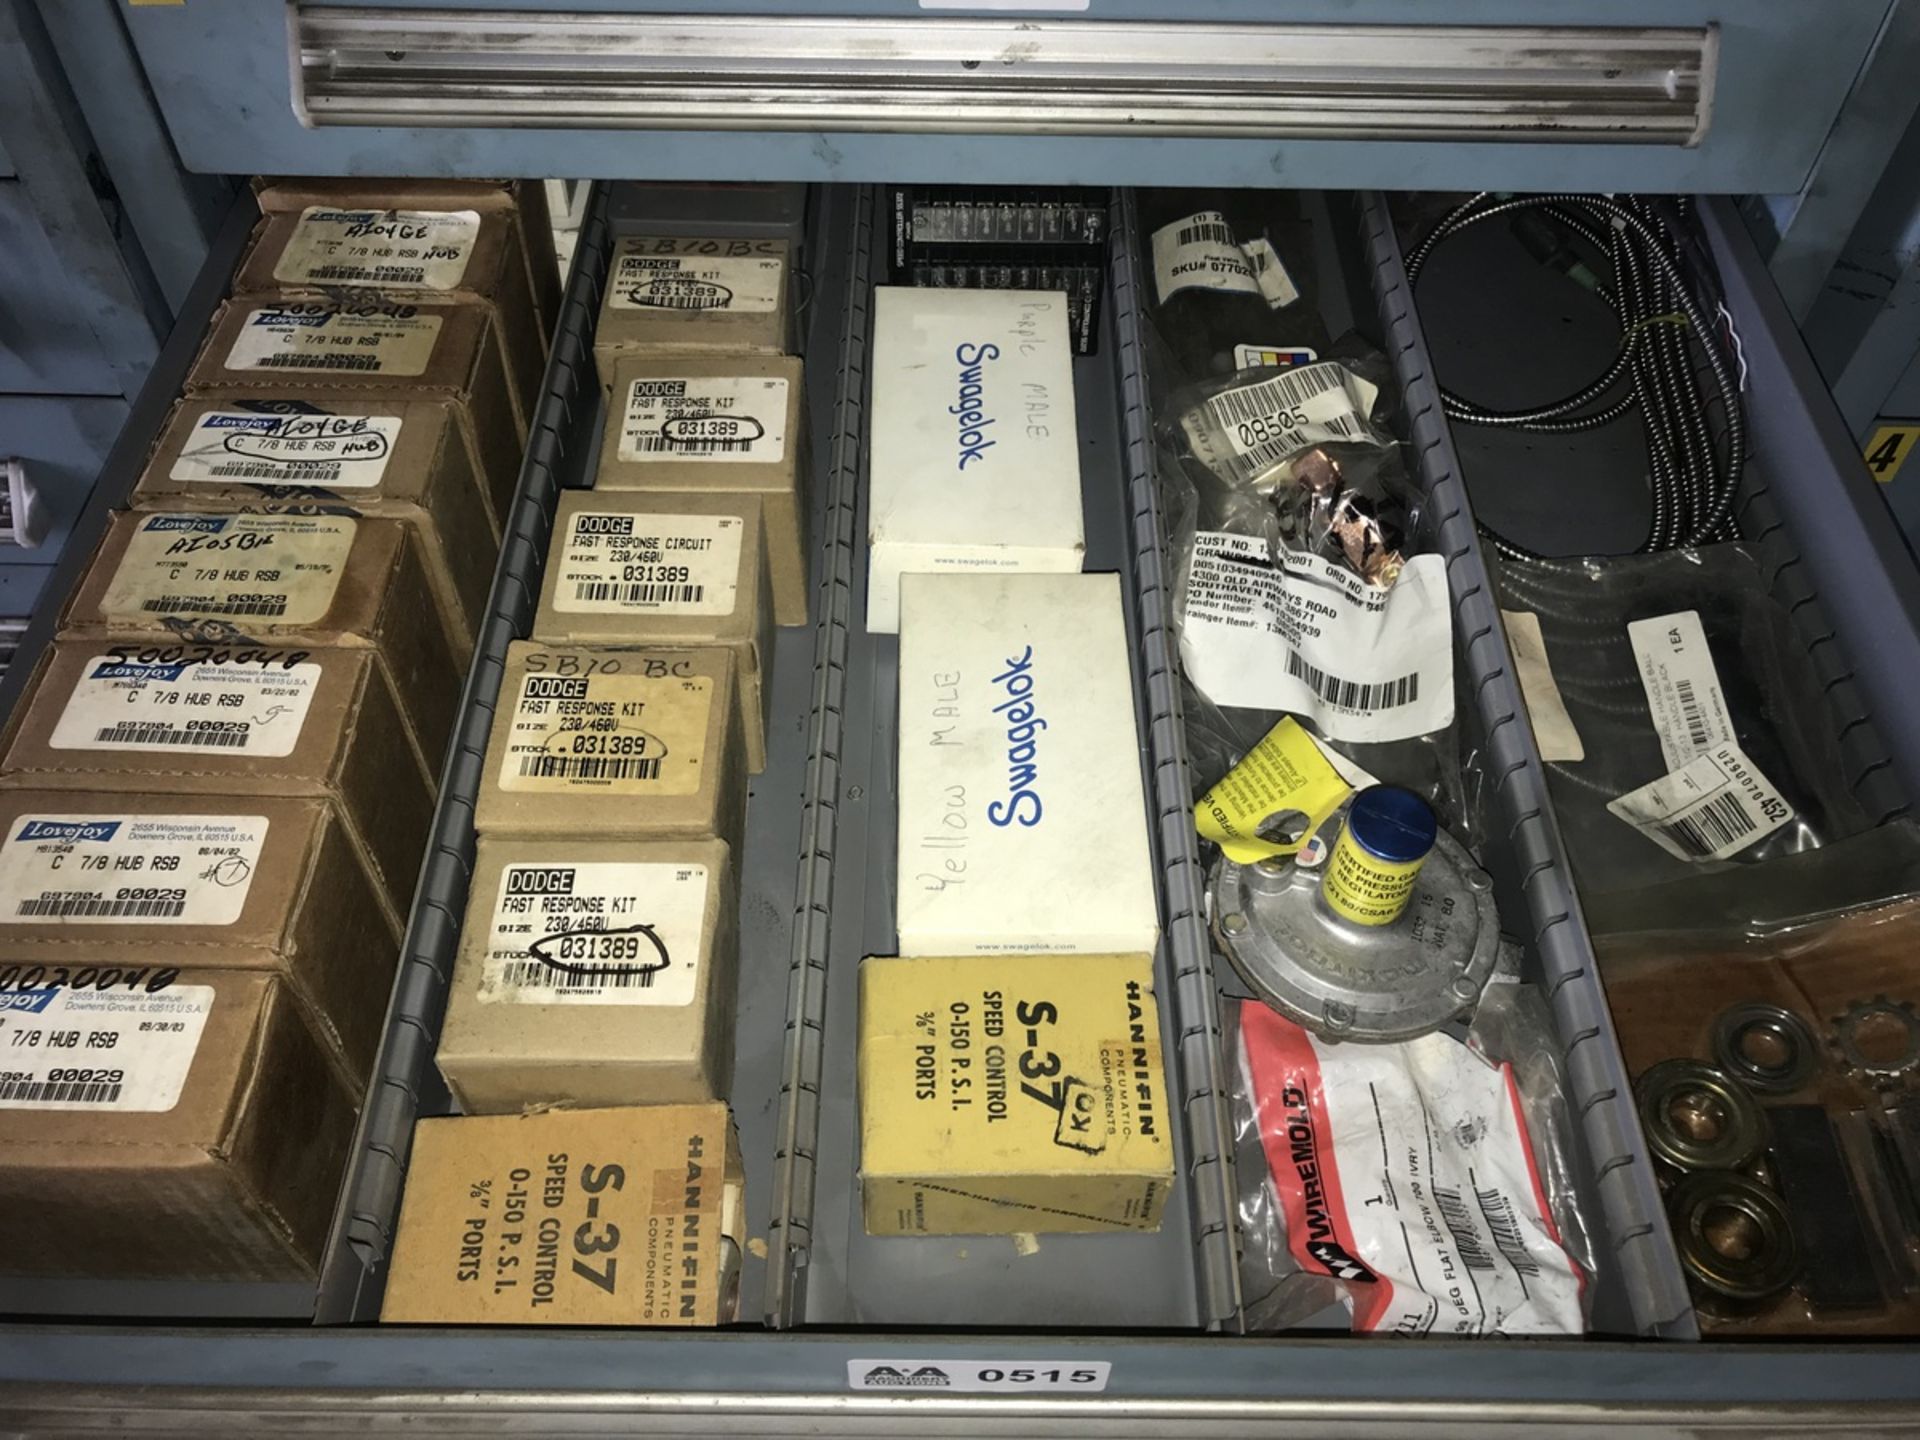 Contents of Drawer including Dodge fast response circuit supply, lovejoy couplings, swagelok